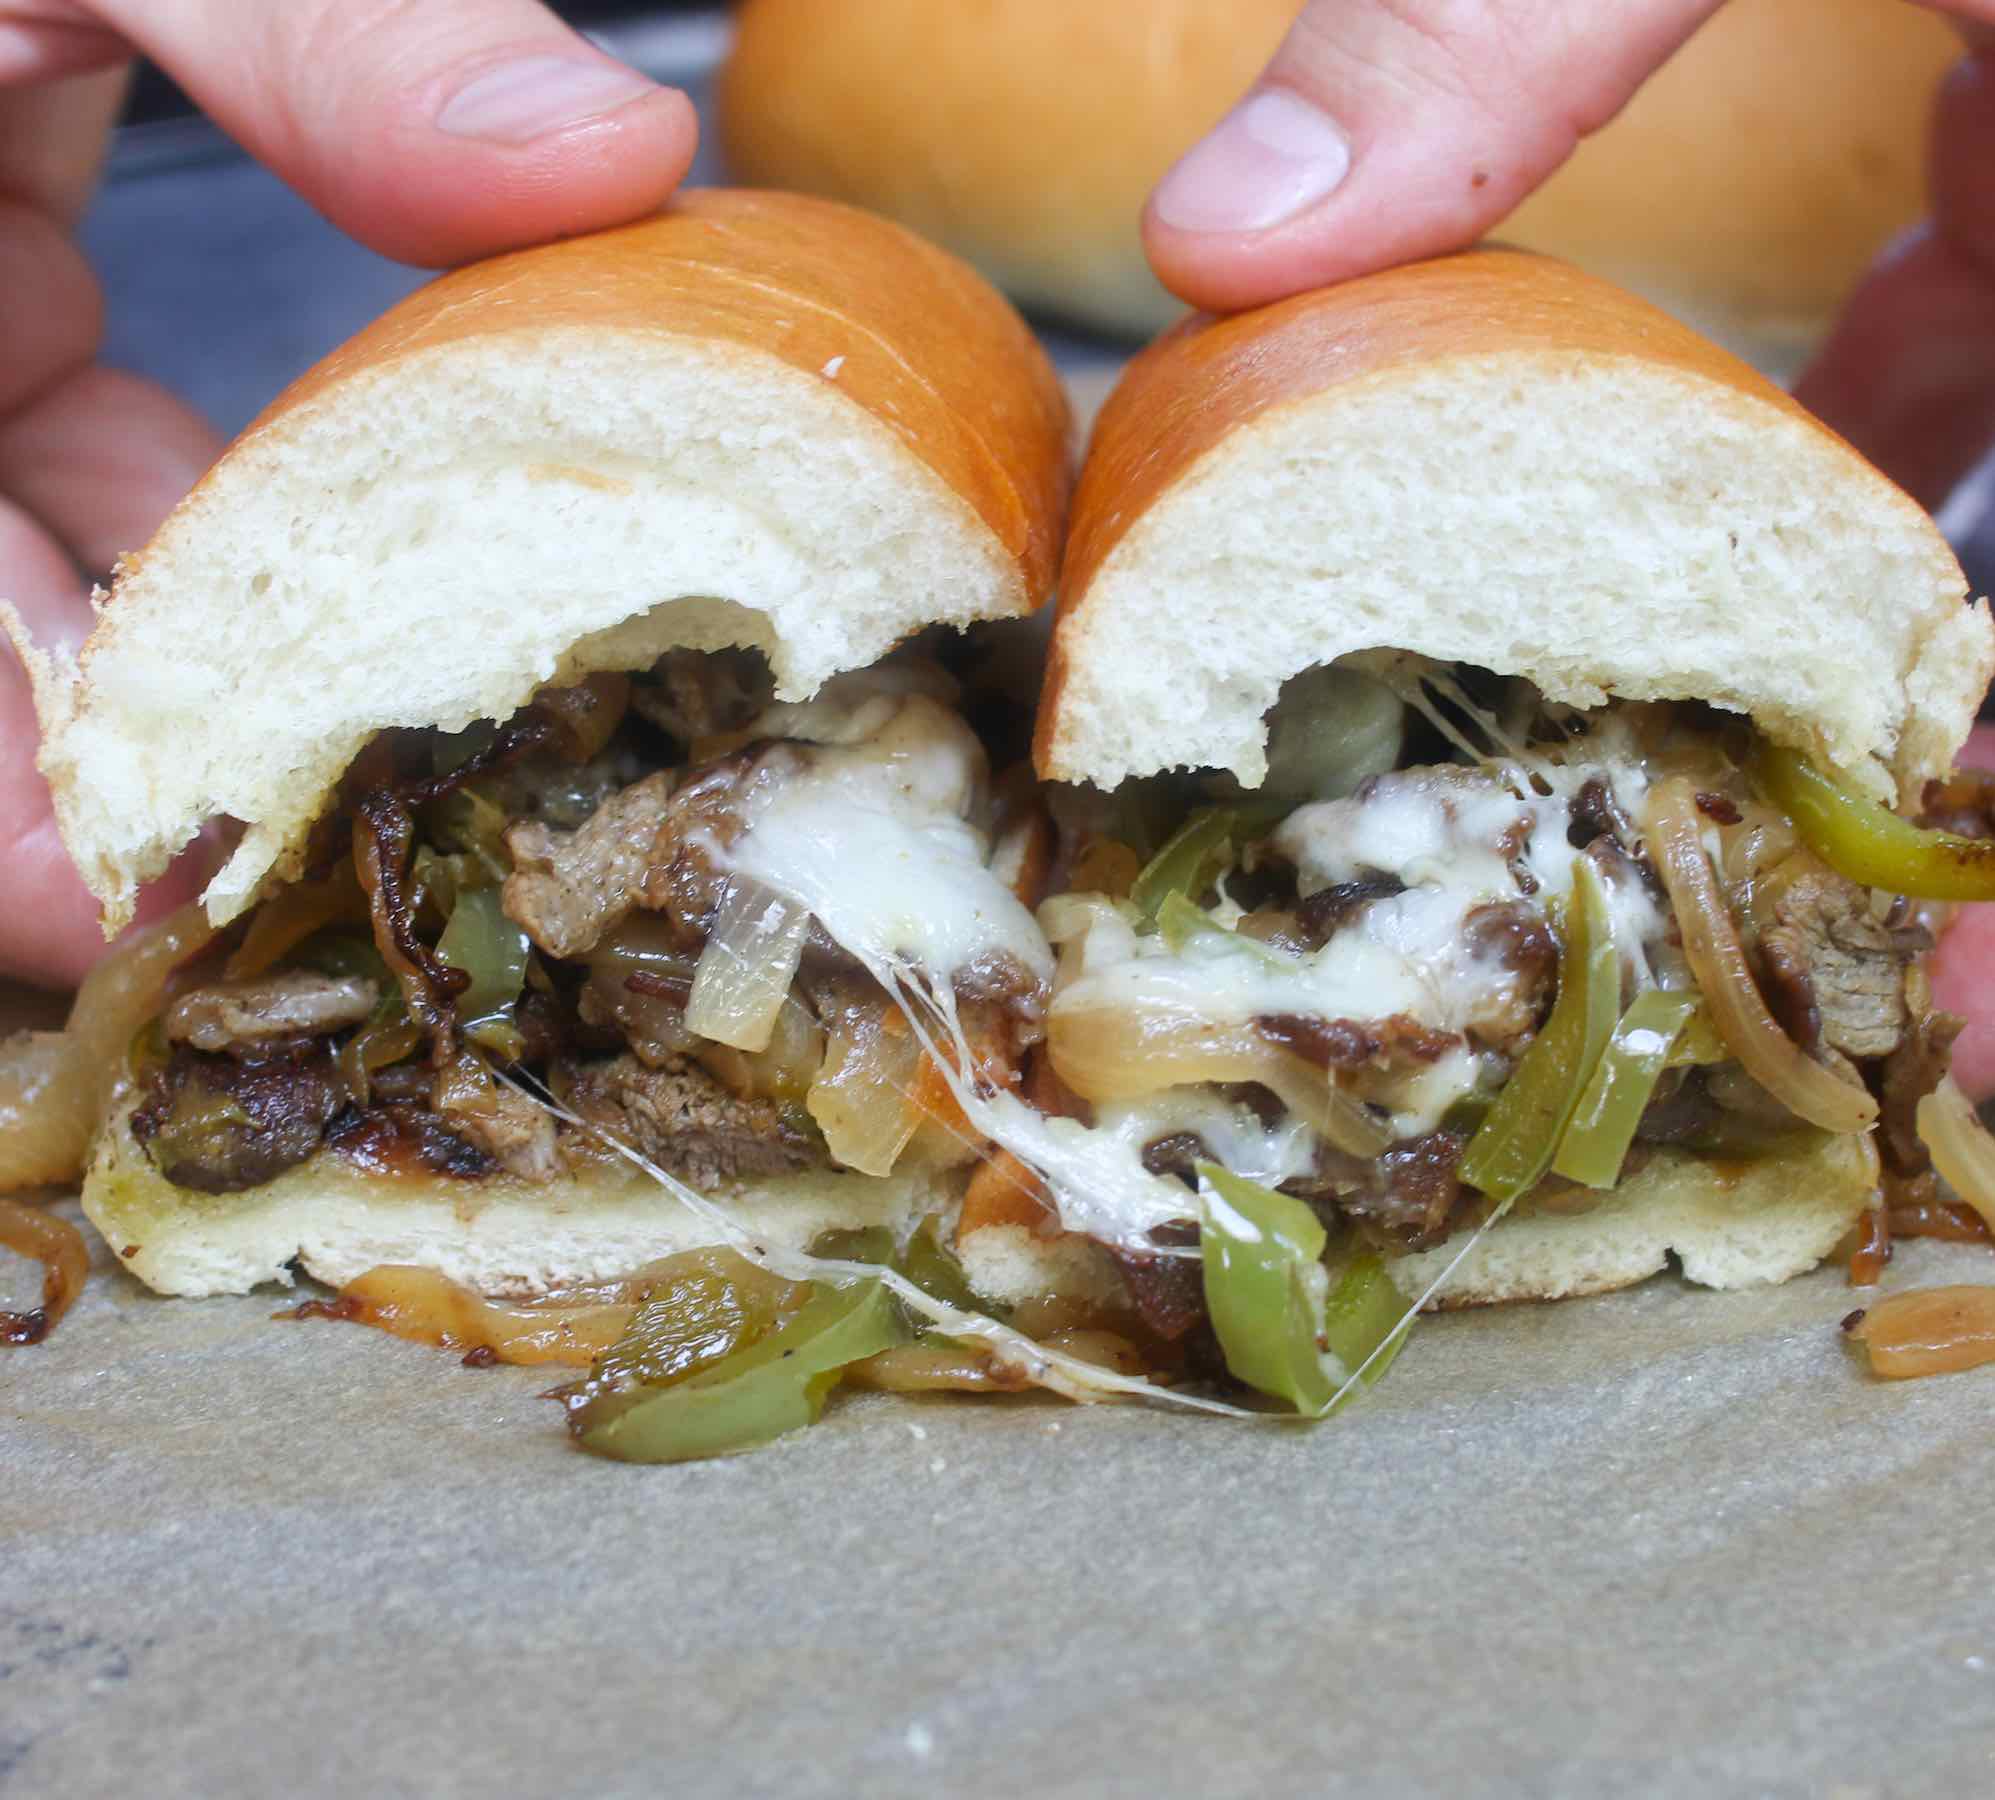 Philly cheesesteak recipe is made with thinly sliced rib-eye beef and sautéed onions, topped with ooey, gooey, melted provolone or Cheez Whiz, and served on a soft yet crusty hoagie roll!